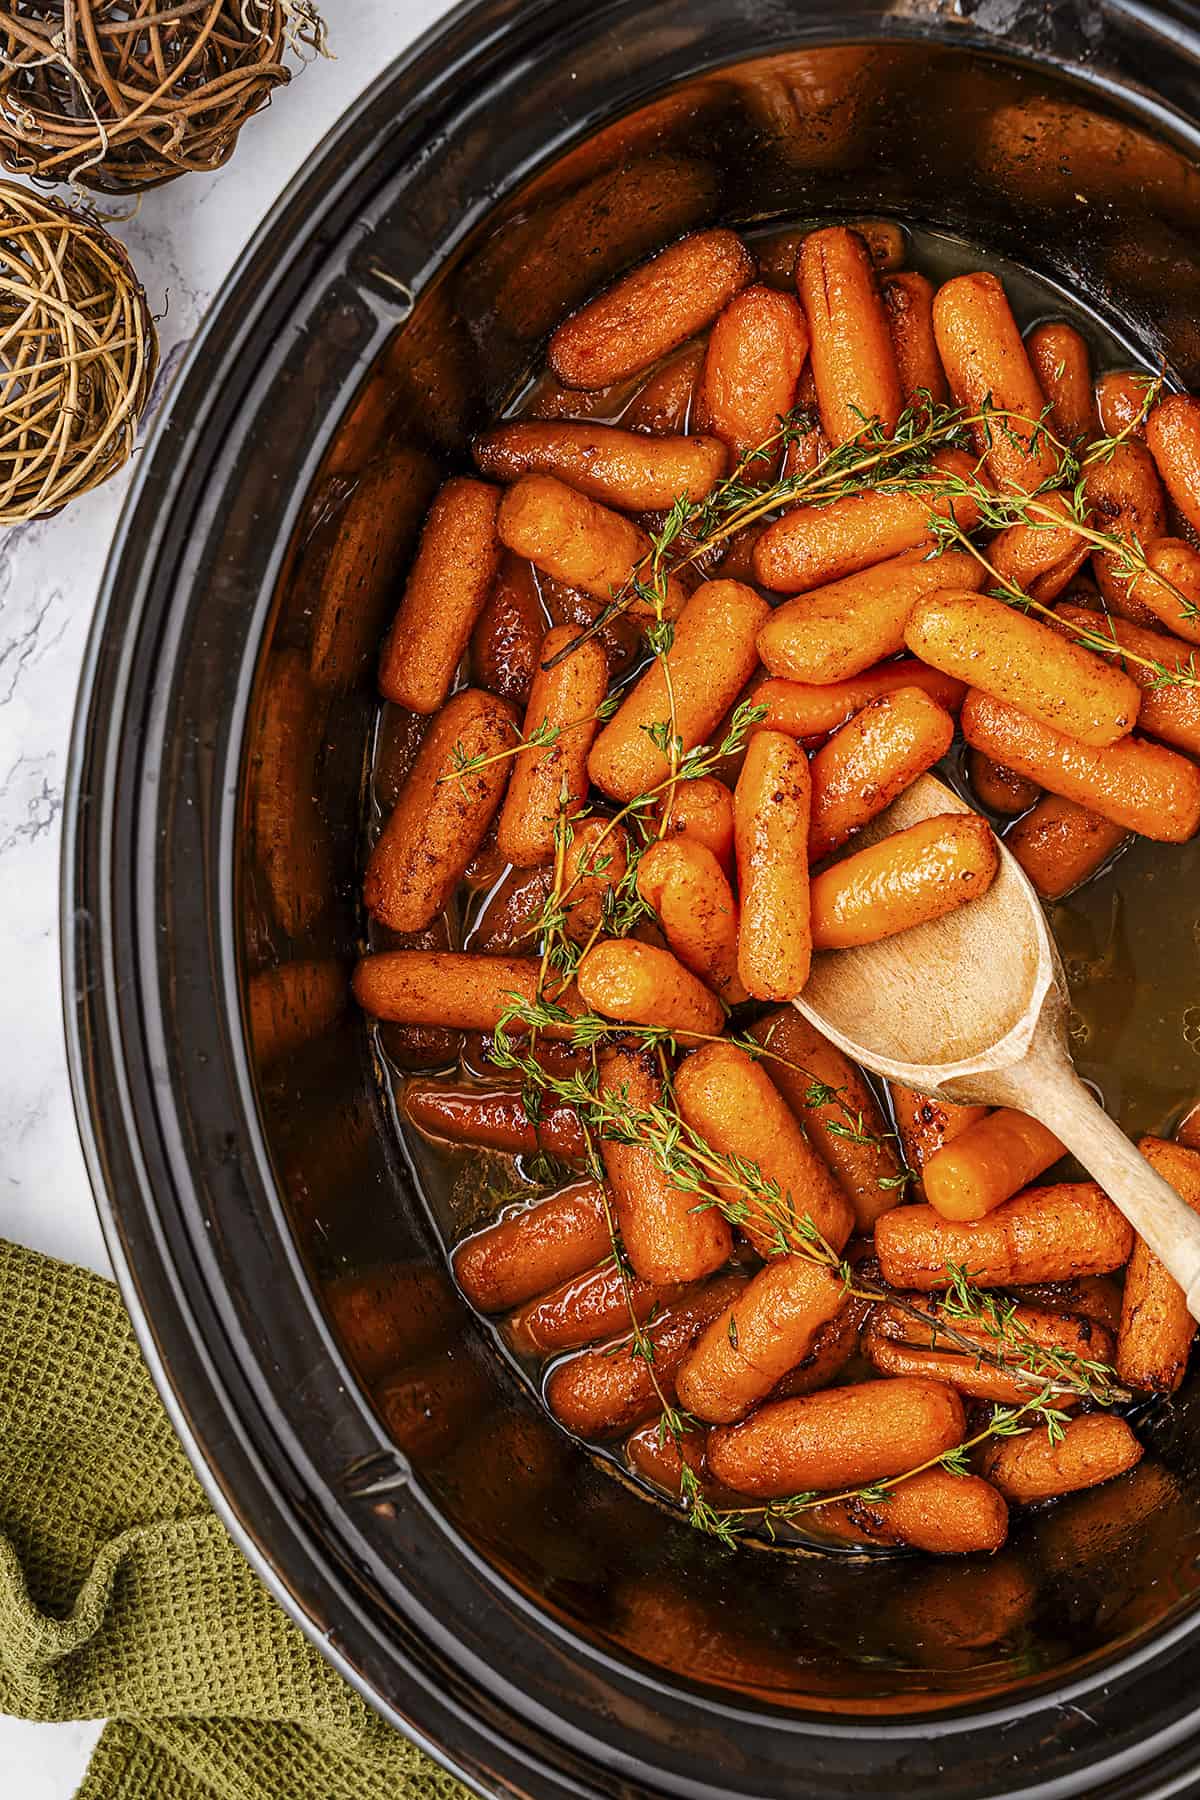 Carrots in crockpot with wooden spoon.